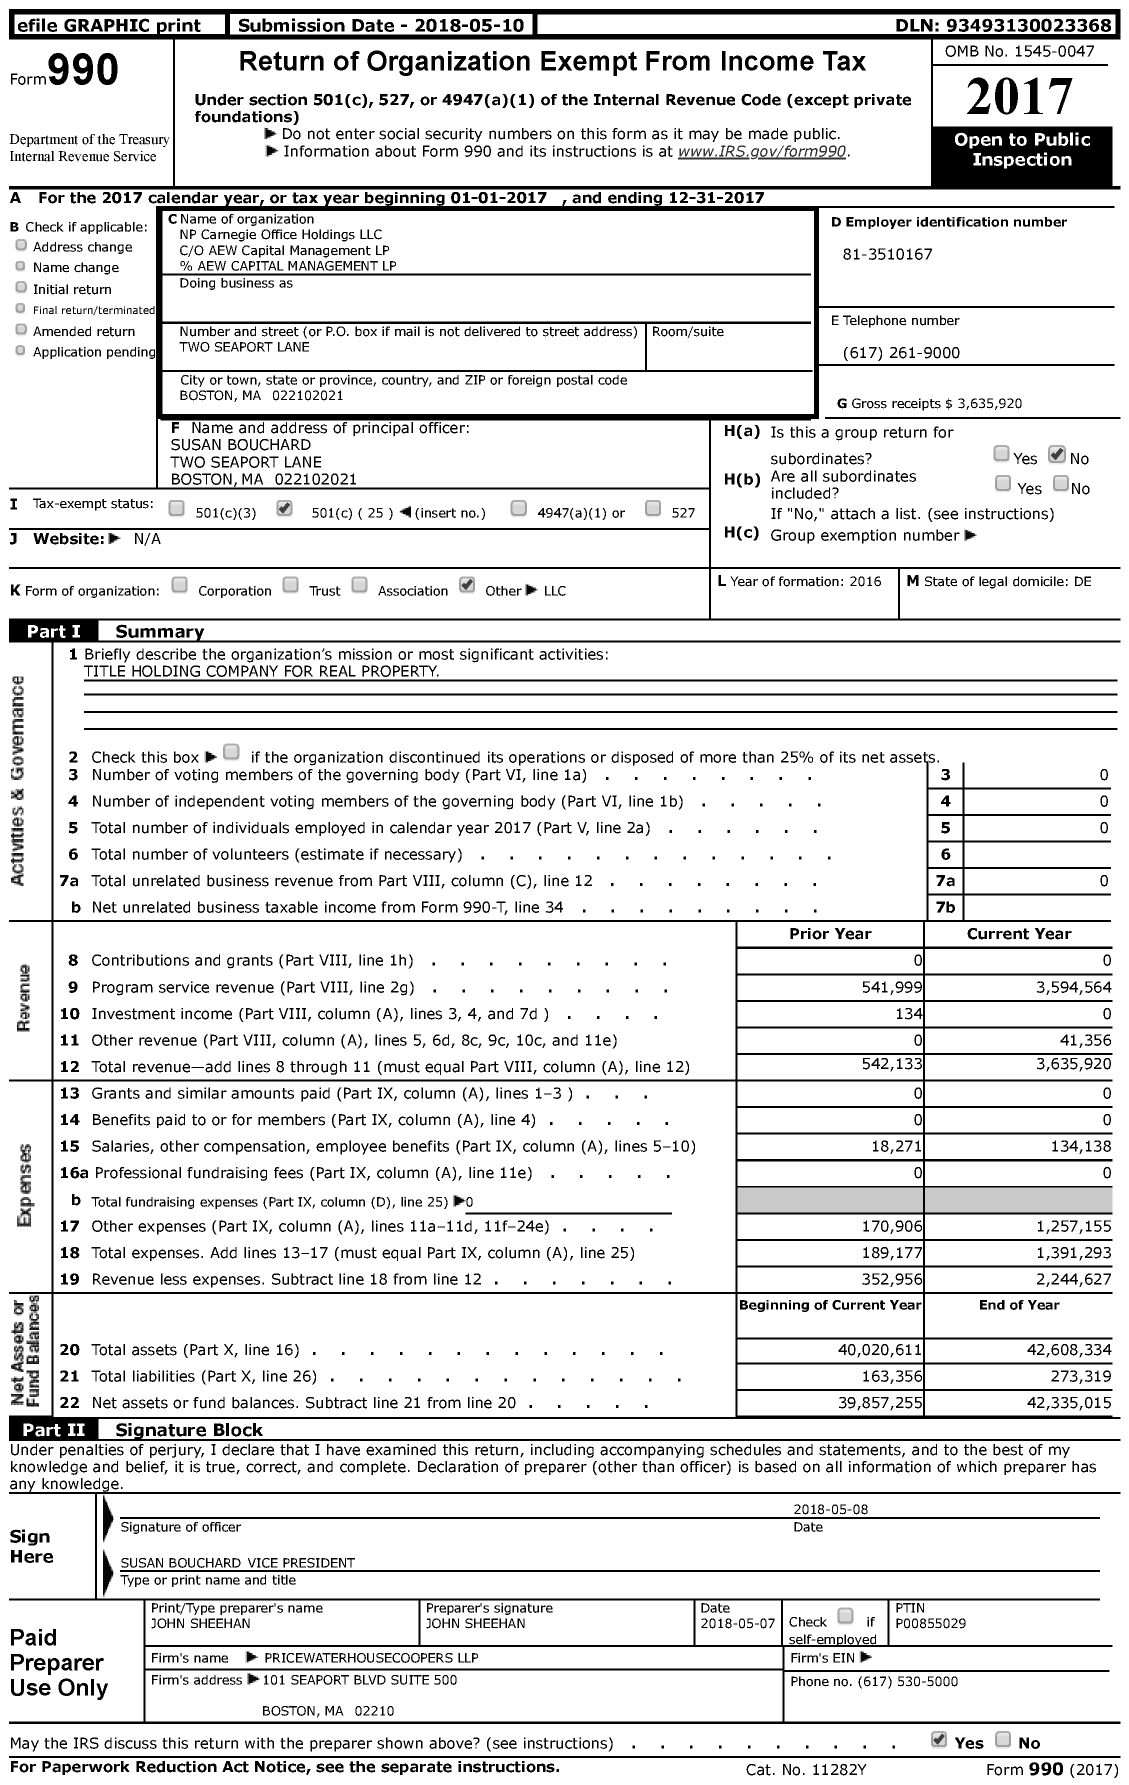 Image of first page of 2017 Form 990 for NP Carnegie Office Holdings LLC